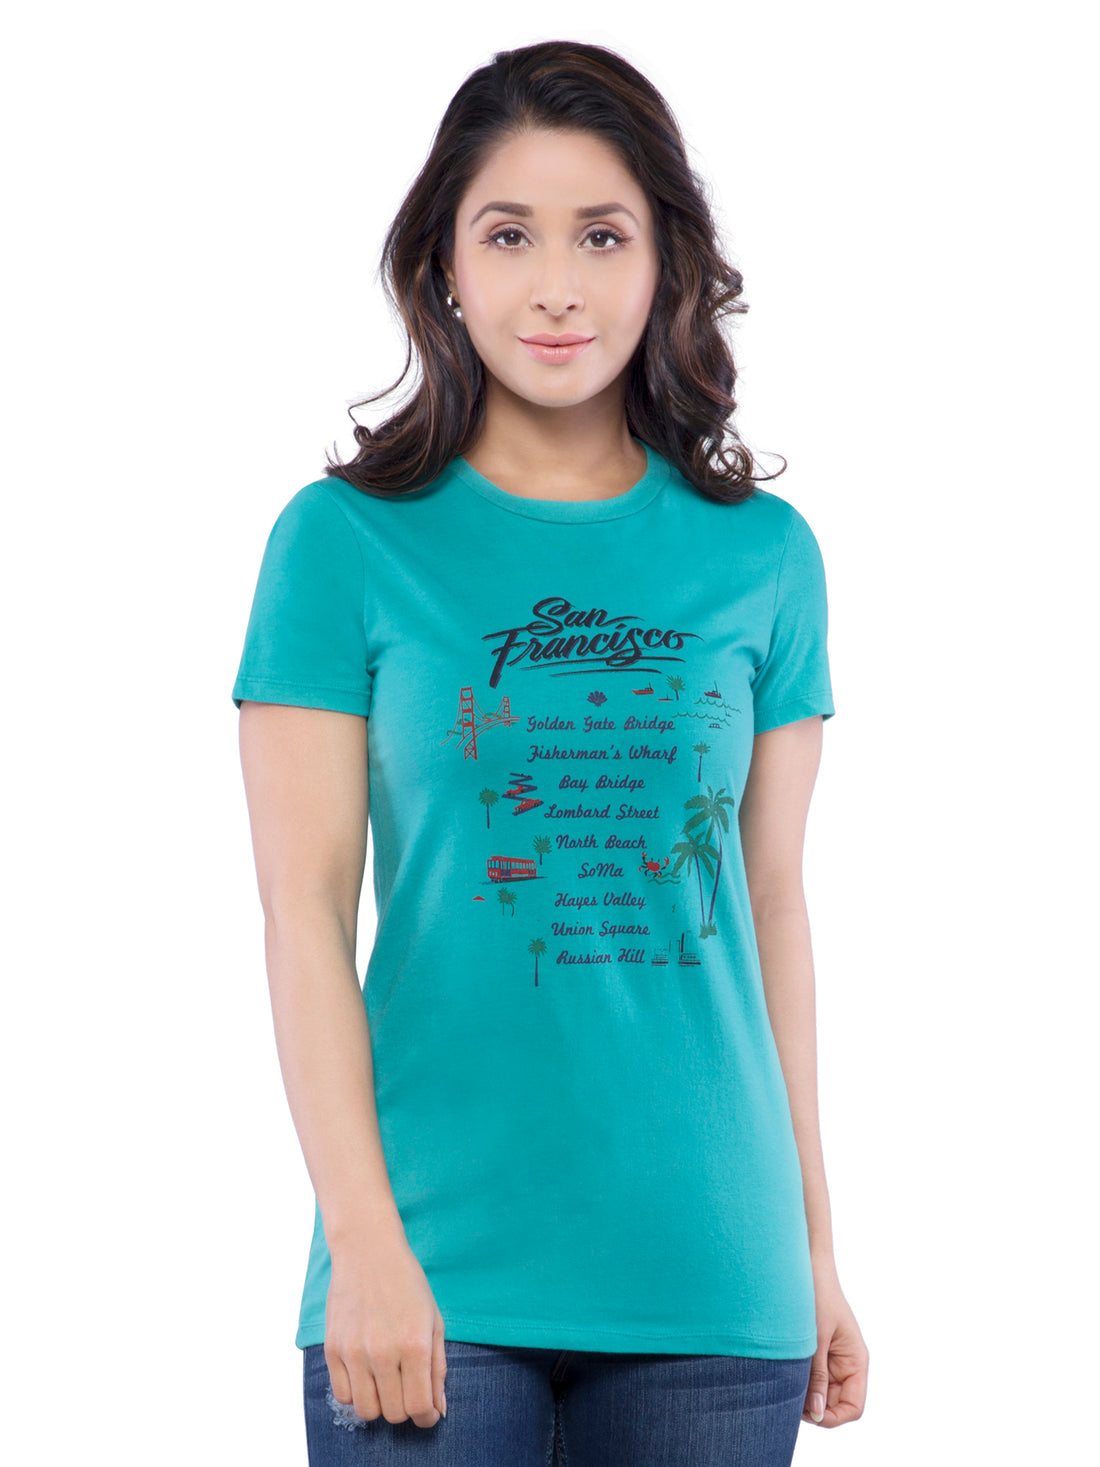 Ficuster Women Turquoise Printed Crew Neck T-Shirt